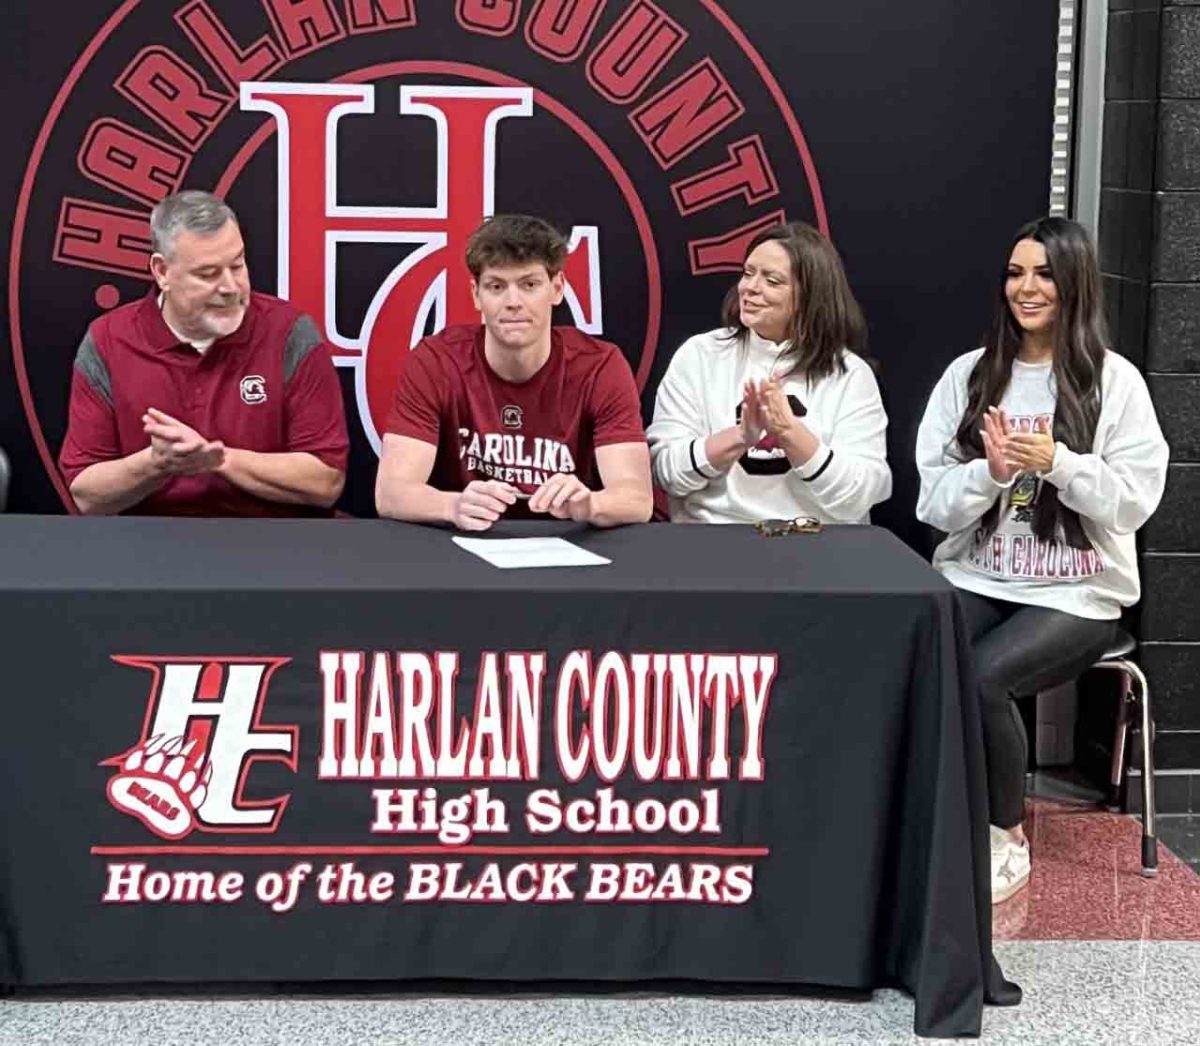 Harlan+County+High+School+senior+guard+Trent+Noah+signed+with+the+University+of+South+Carolina+on+Friday+at+HCHS.+Pictured+with+Noah+are+his+father%2C+Trent%3B+mother%2C+Stacy%3B+and+sister%2C+Emersyn.